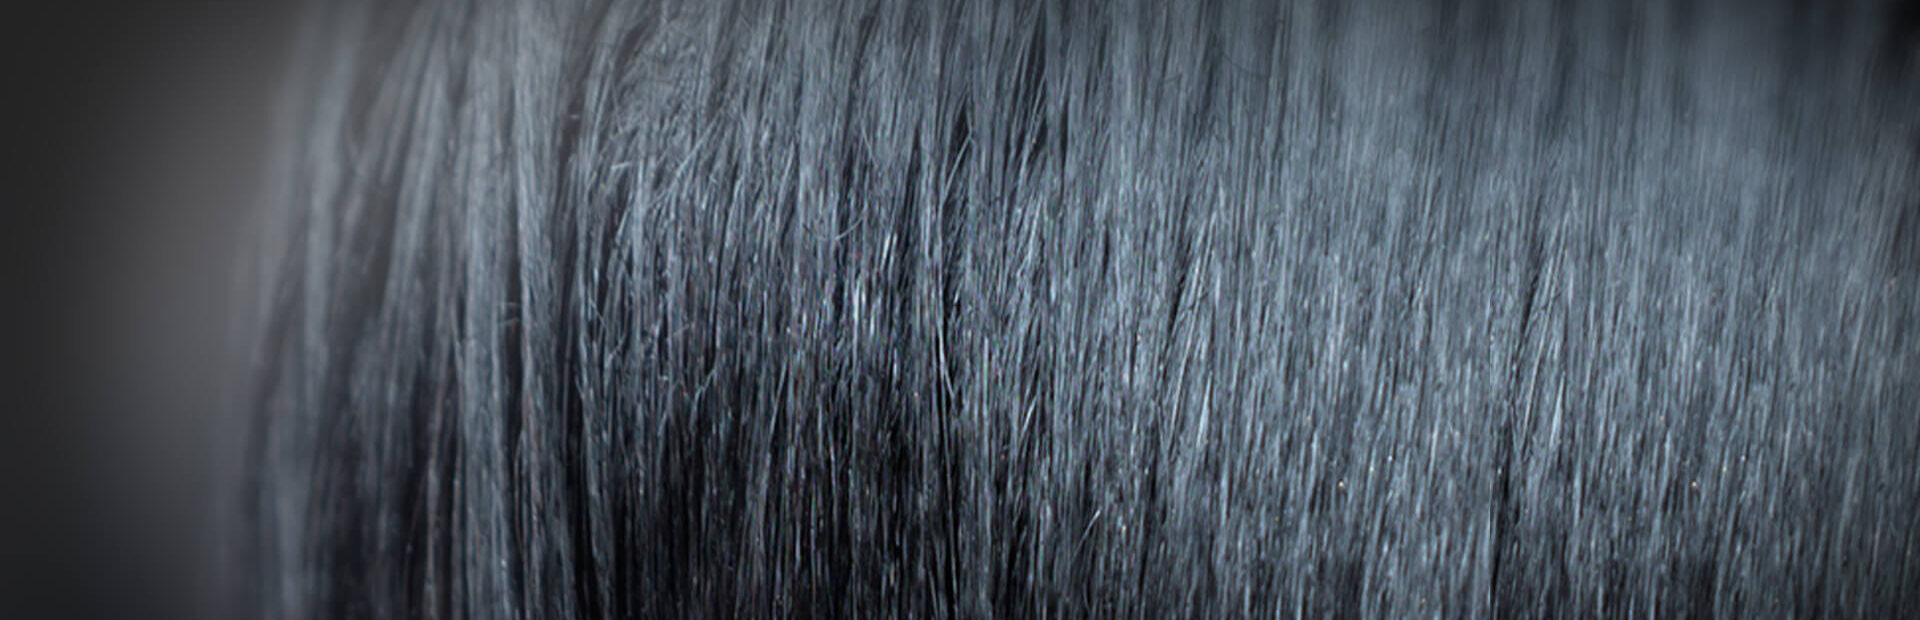 Close up of Black hair that has been treated with a chemical hair relaxer